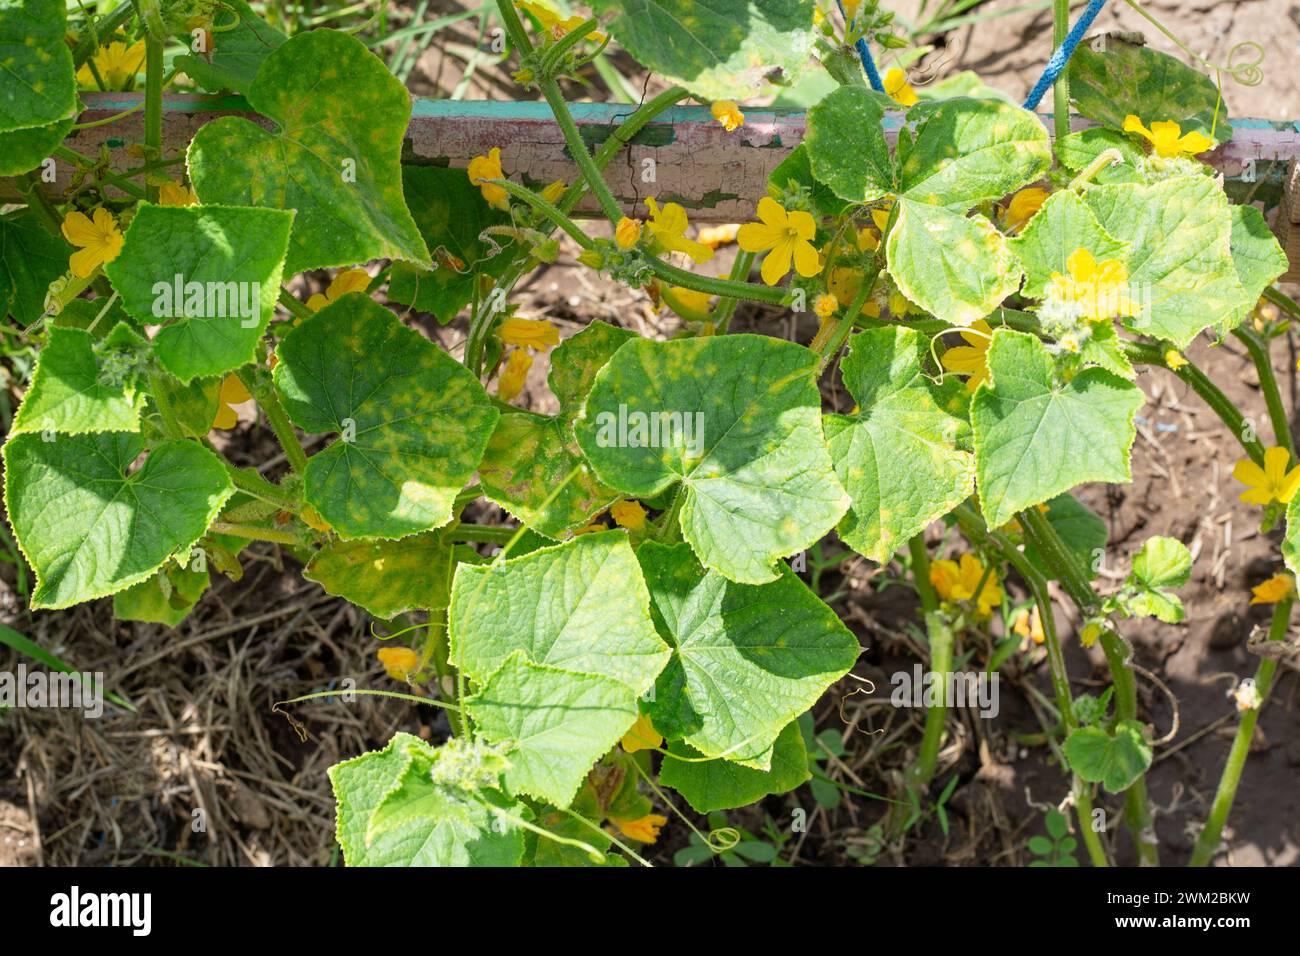 bushes of a cucumber plant in the garden with affected leaves and fruits. Cucumber mosaic, an infectious plant disease. Stock Photo